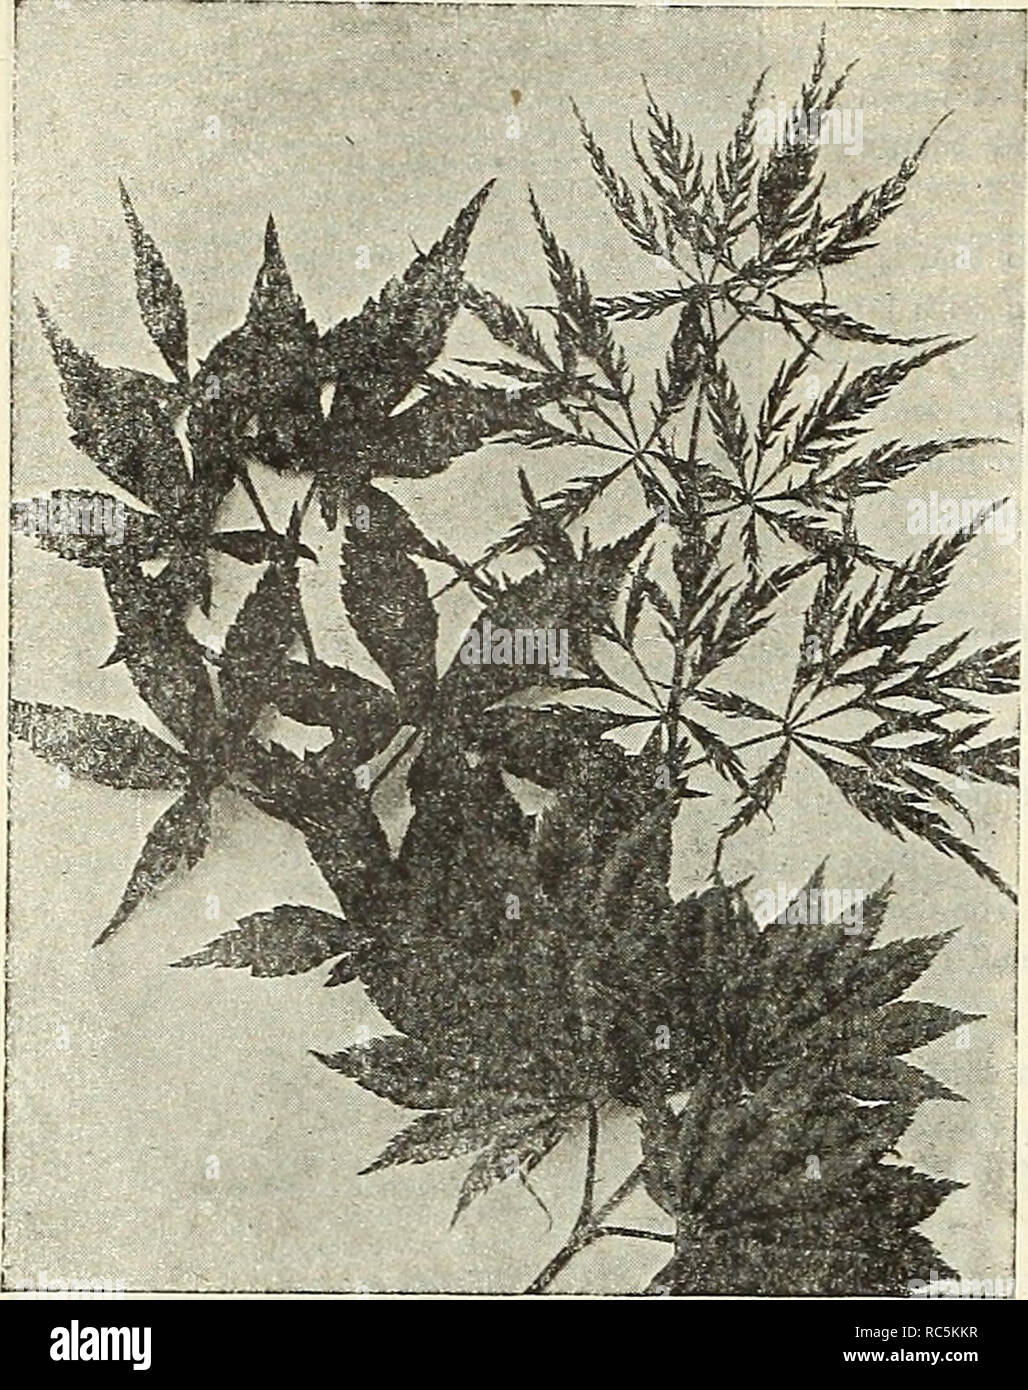 . Dreer's mid-summer catalogue 1916. Flowers Seeds Catalogs; Fruit Seeds Catalogs; Vegetables Seeds Catalogs; Nurseries (Horticulture) Catalogs; Gardening Equipment and supplies Catalogs. 32 HENRY A. DREER, PHILADELPHIA—HARDY SHRUBS. Japanese Maples Ligustrum Ovalifolium Aureum (Golden-leaved Privet). A beautiful golden variegated form and very effec- tive for associating with other dwarf shrubs, 35 cts. each, Lonicera Tatarica {Tartarian Honeysuckle.) .Pink flowers, contrasting beautifully with the foliage; blooms in June. 35 cts. each. — Virginalis alba. A creamy white-colored variety of the Stock Photo